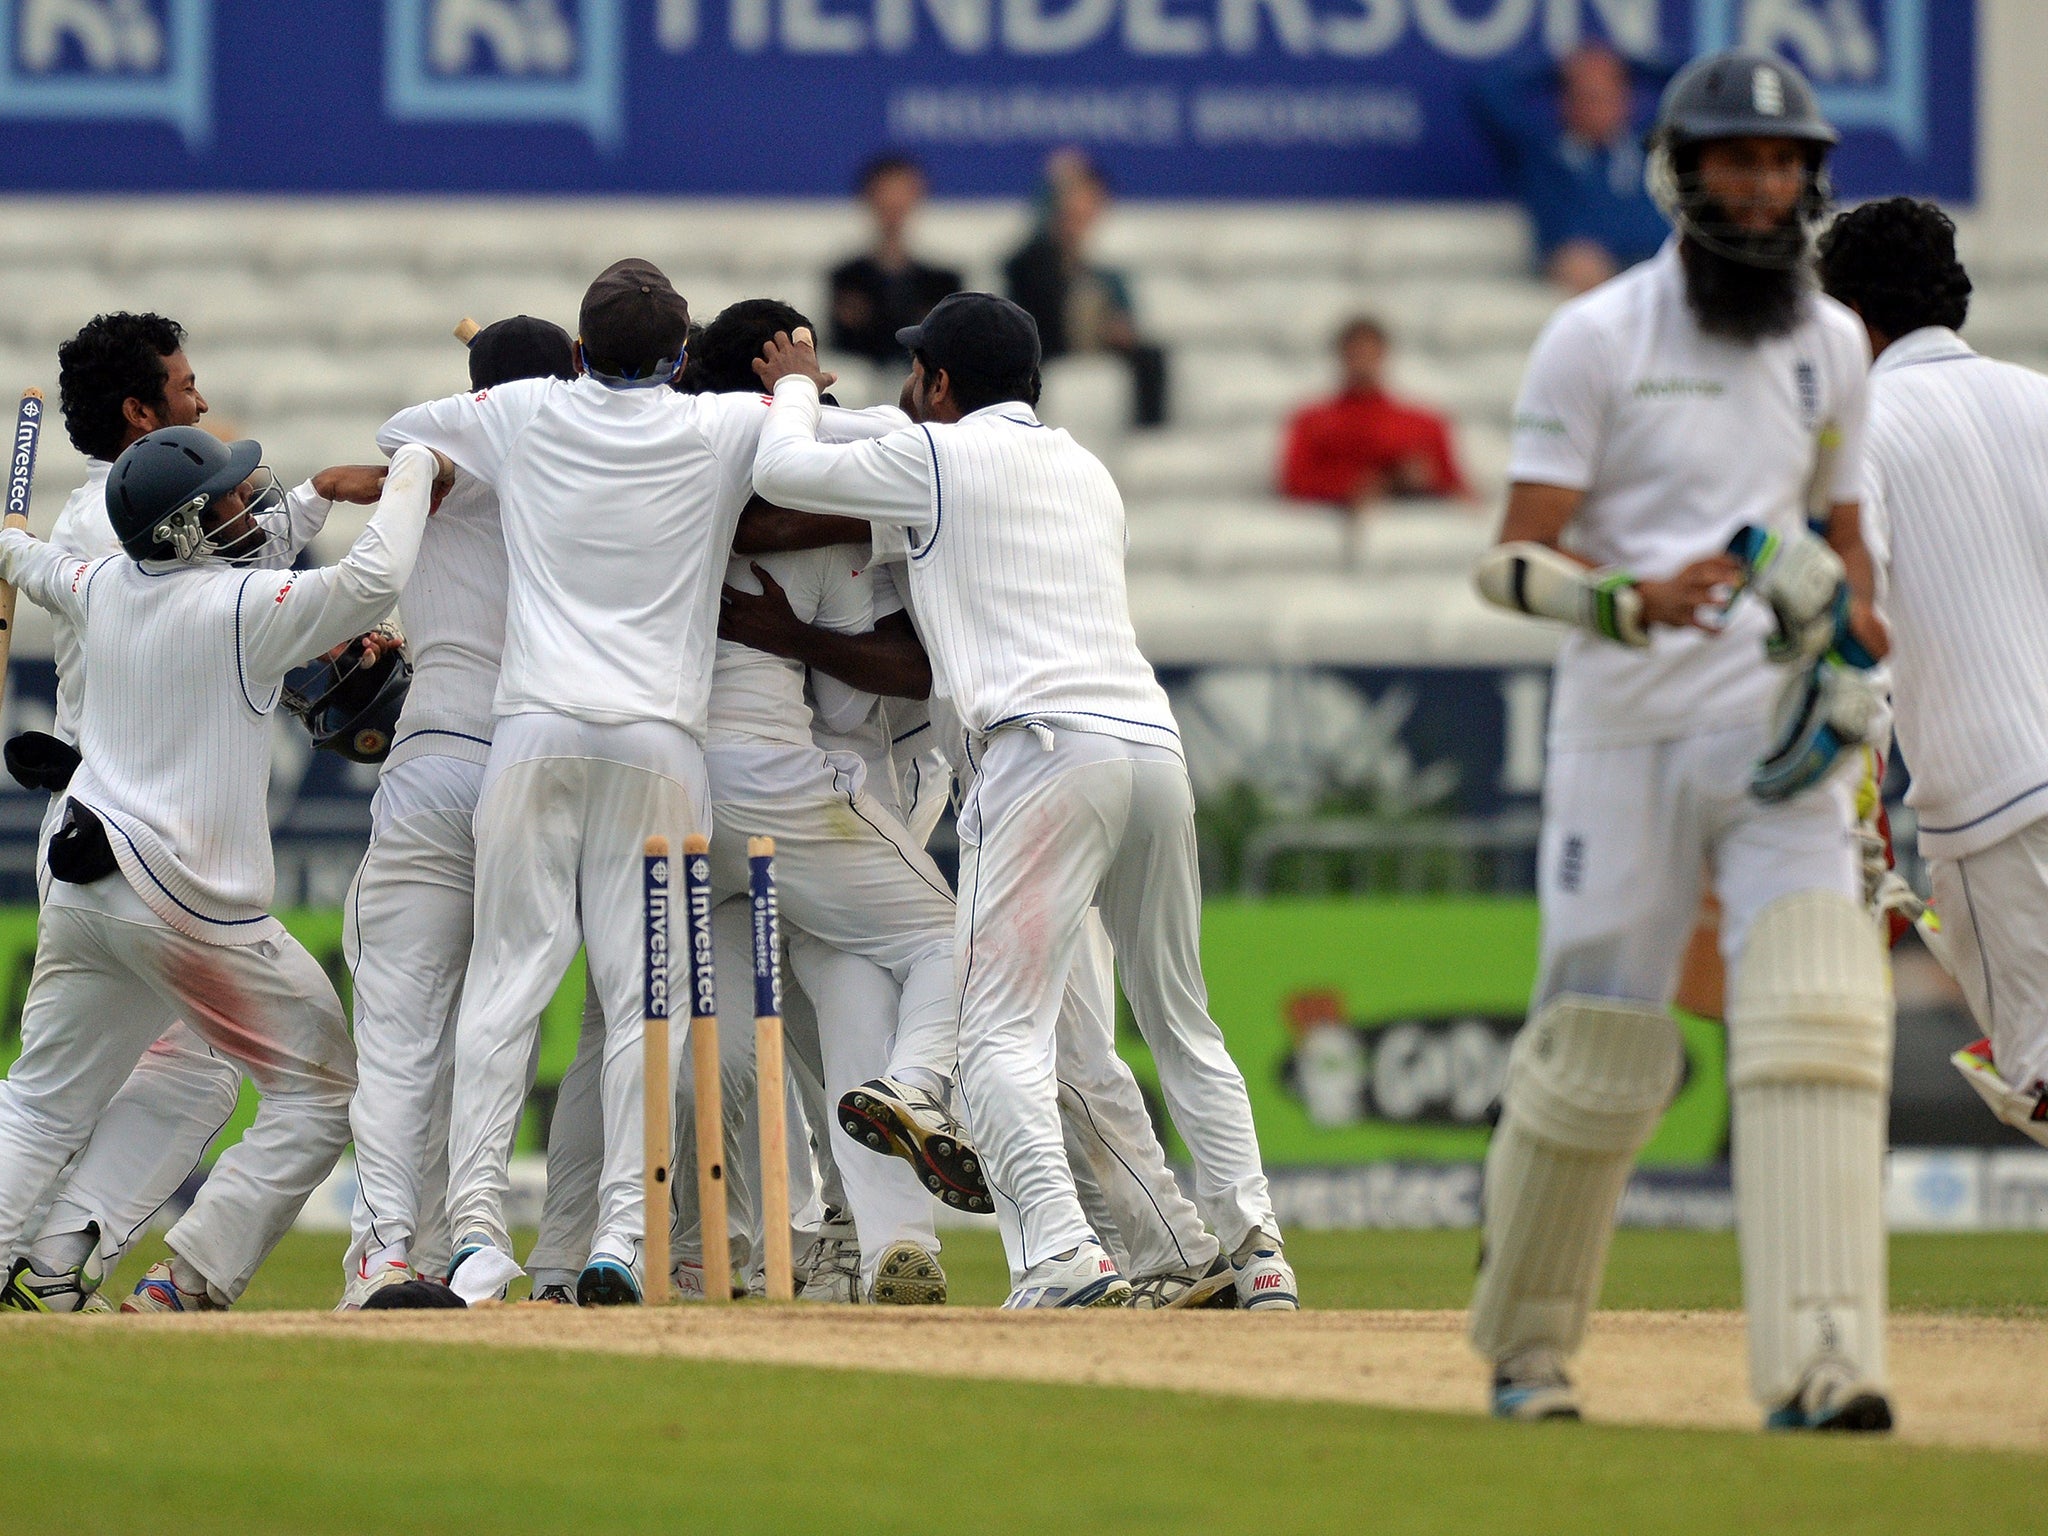 Sri Lankan players celebrate after taking the wicket of England's James Anderson with the penultimate ball of the game